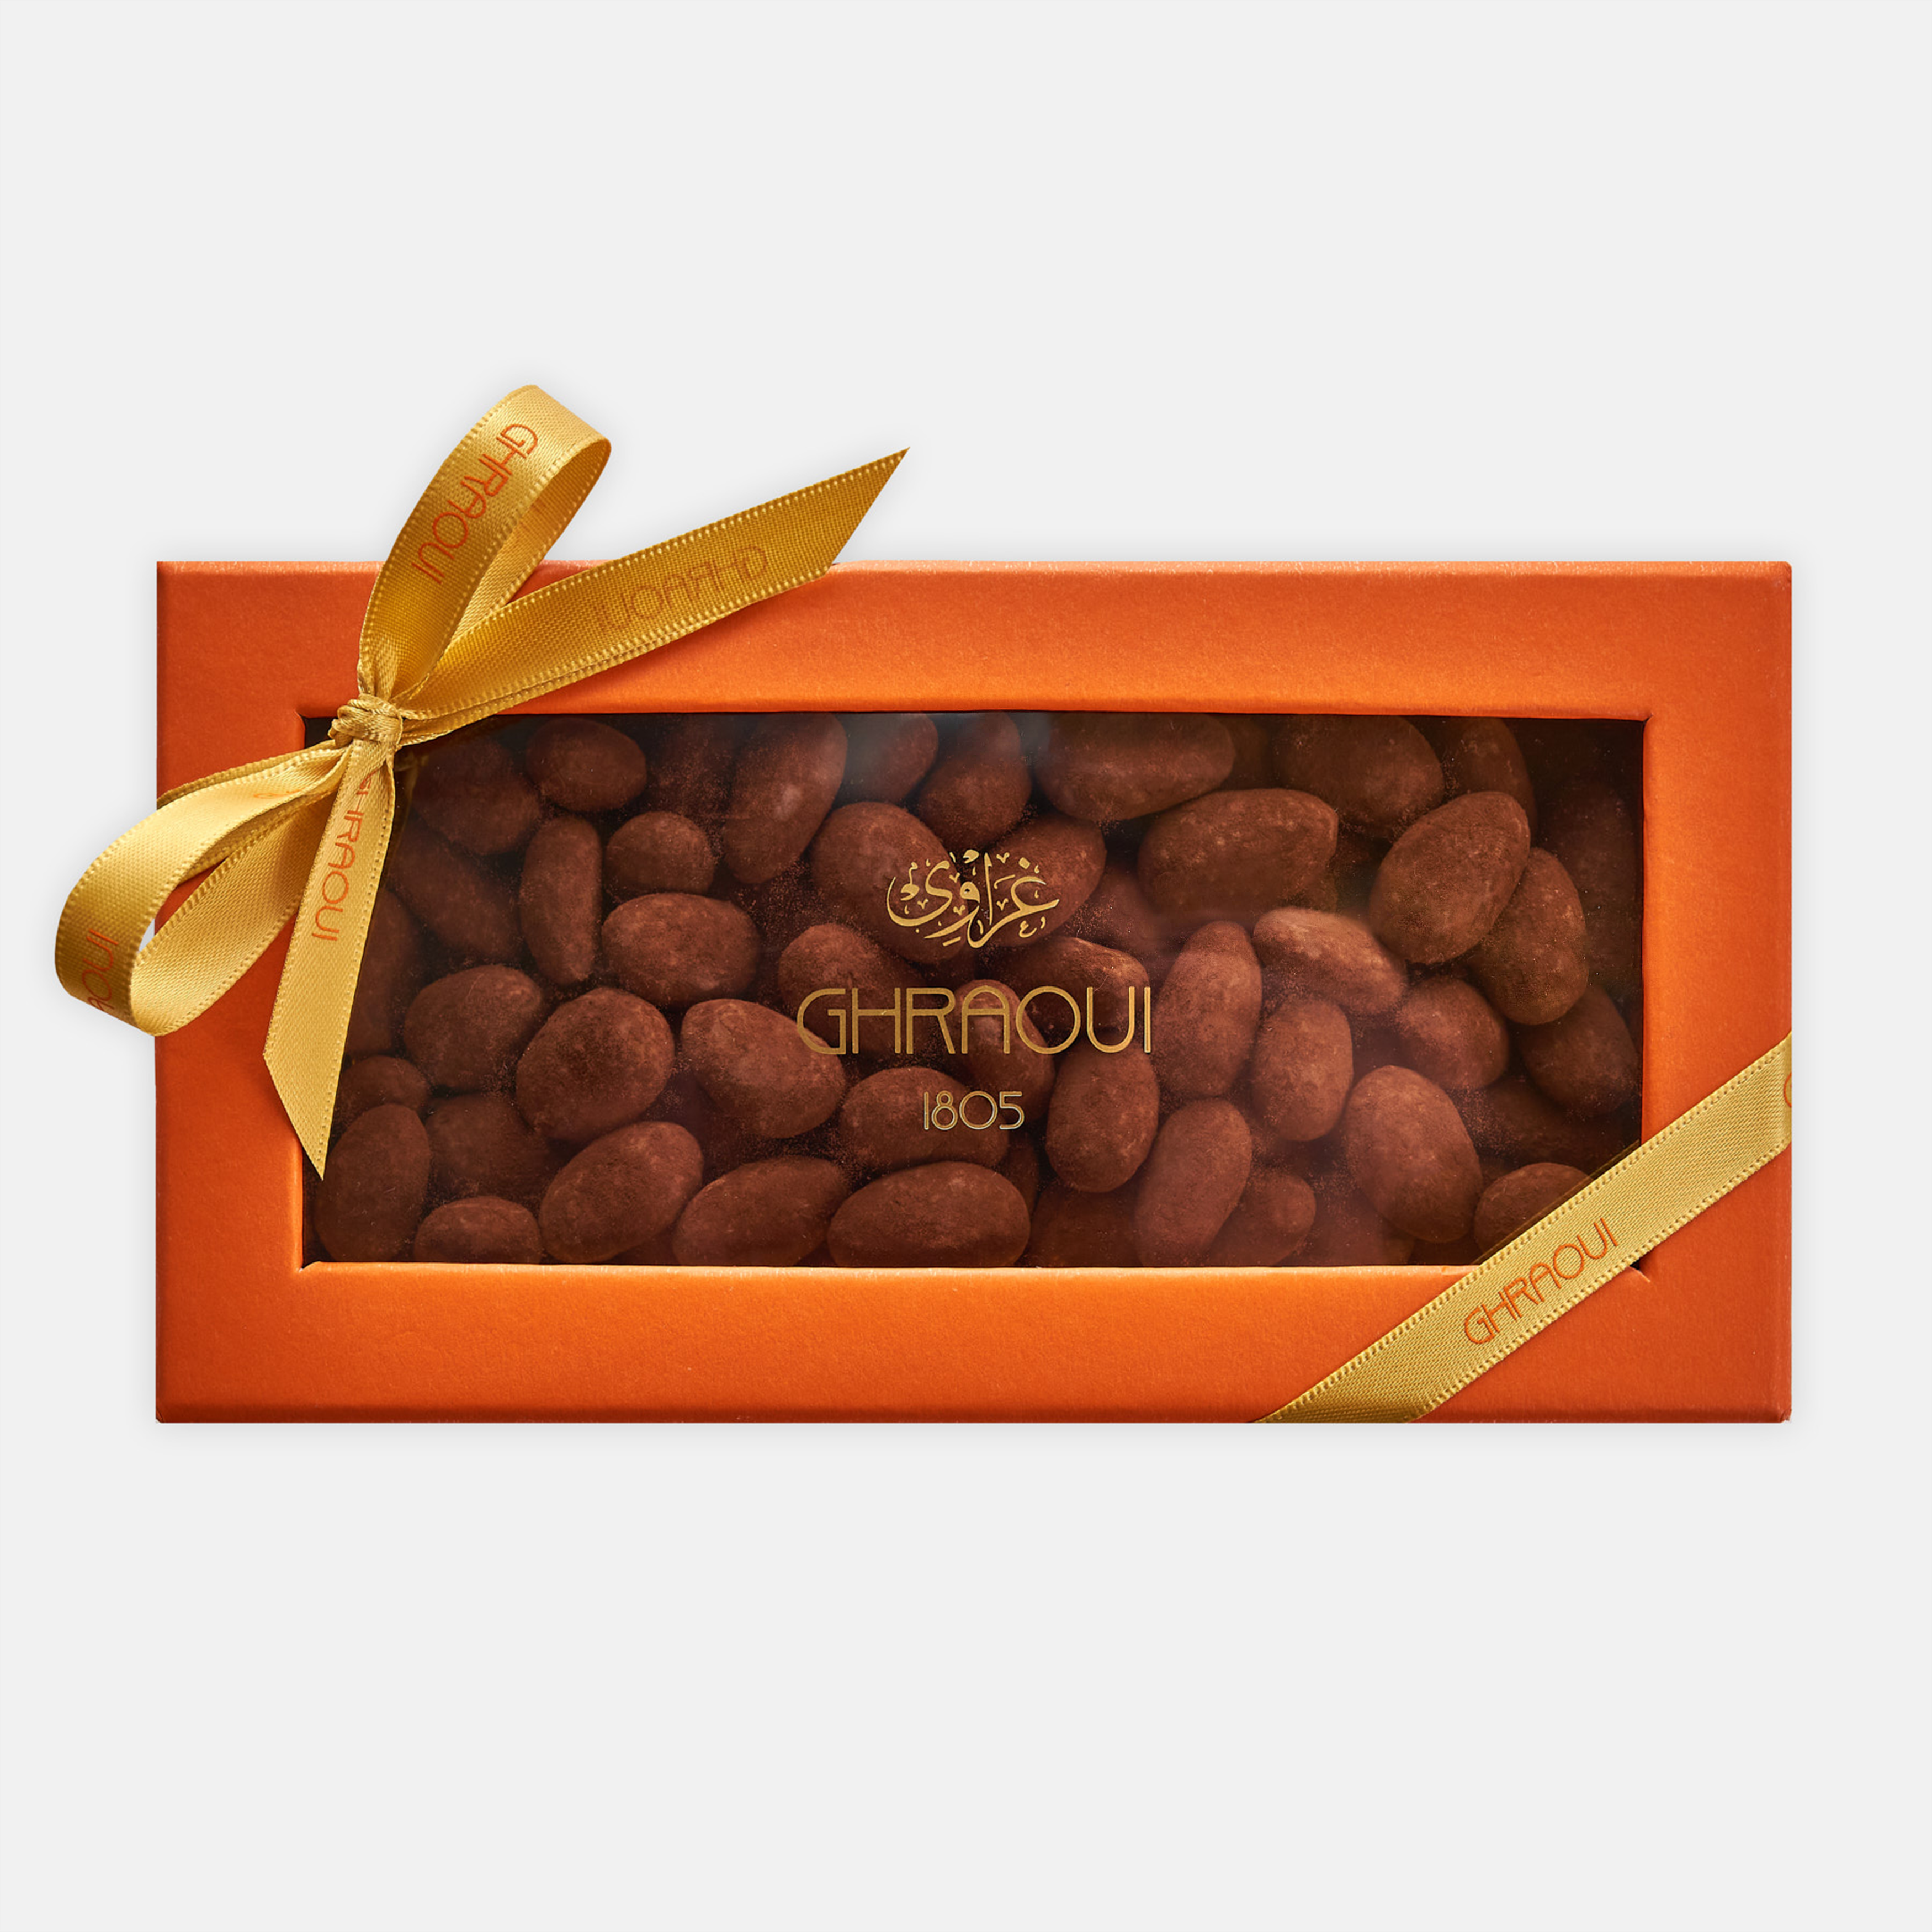 Roasted almonds coated with praline and dusted in cocoa powder - ghraoui-chocolate Edit alt text